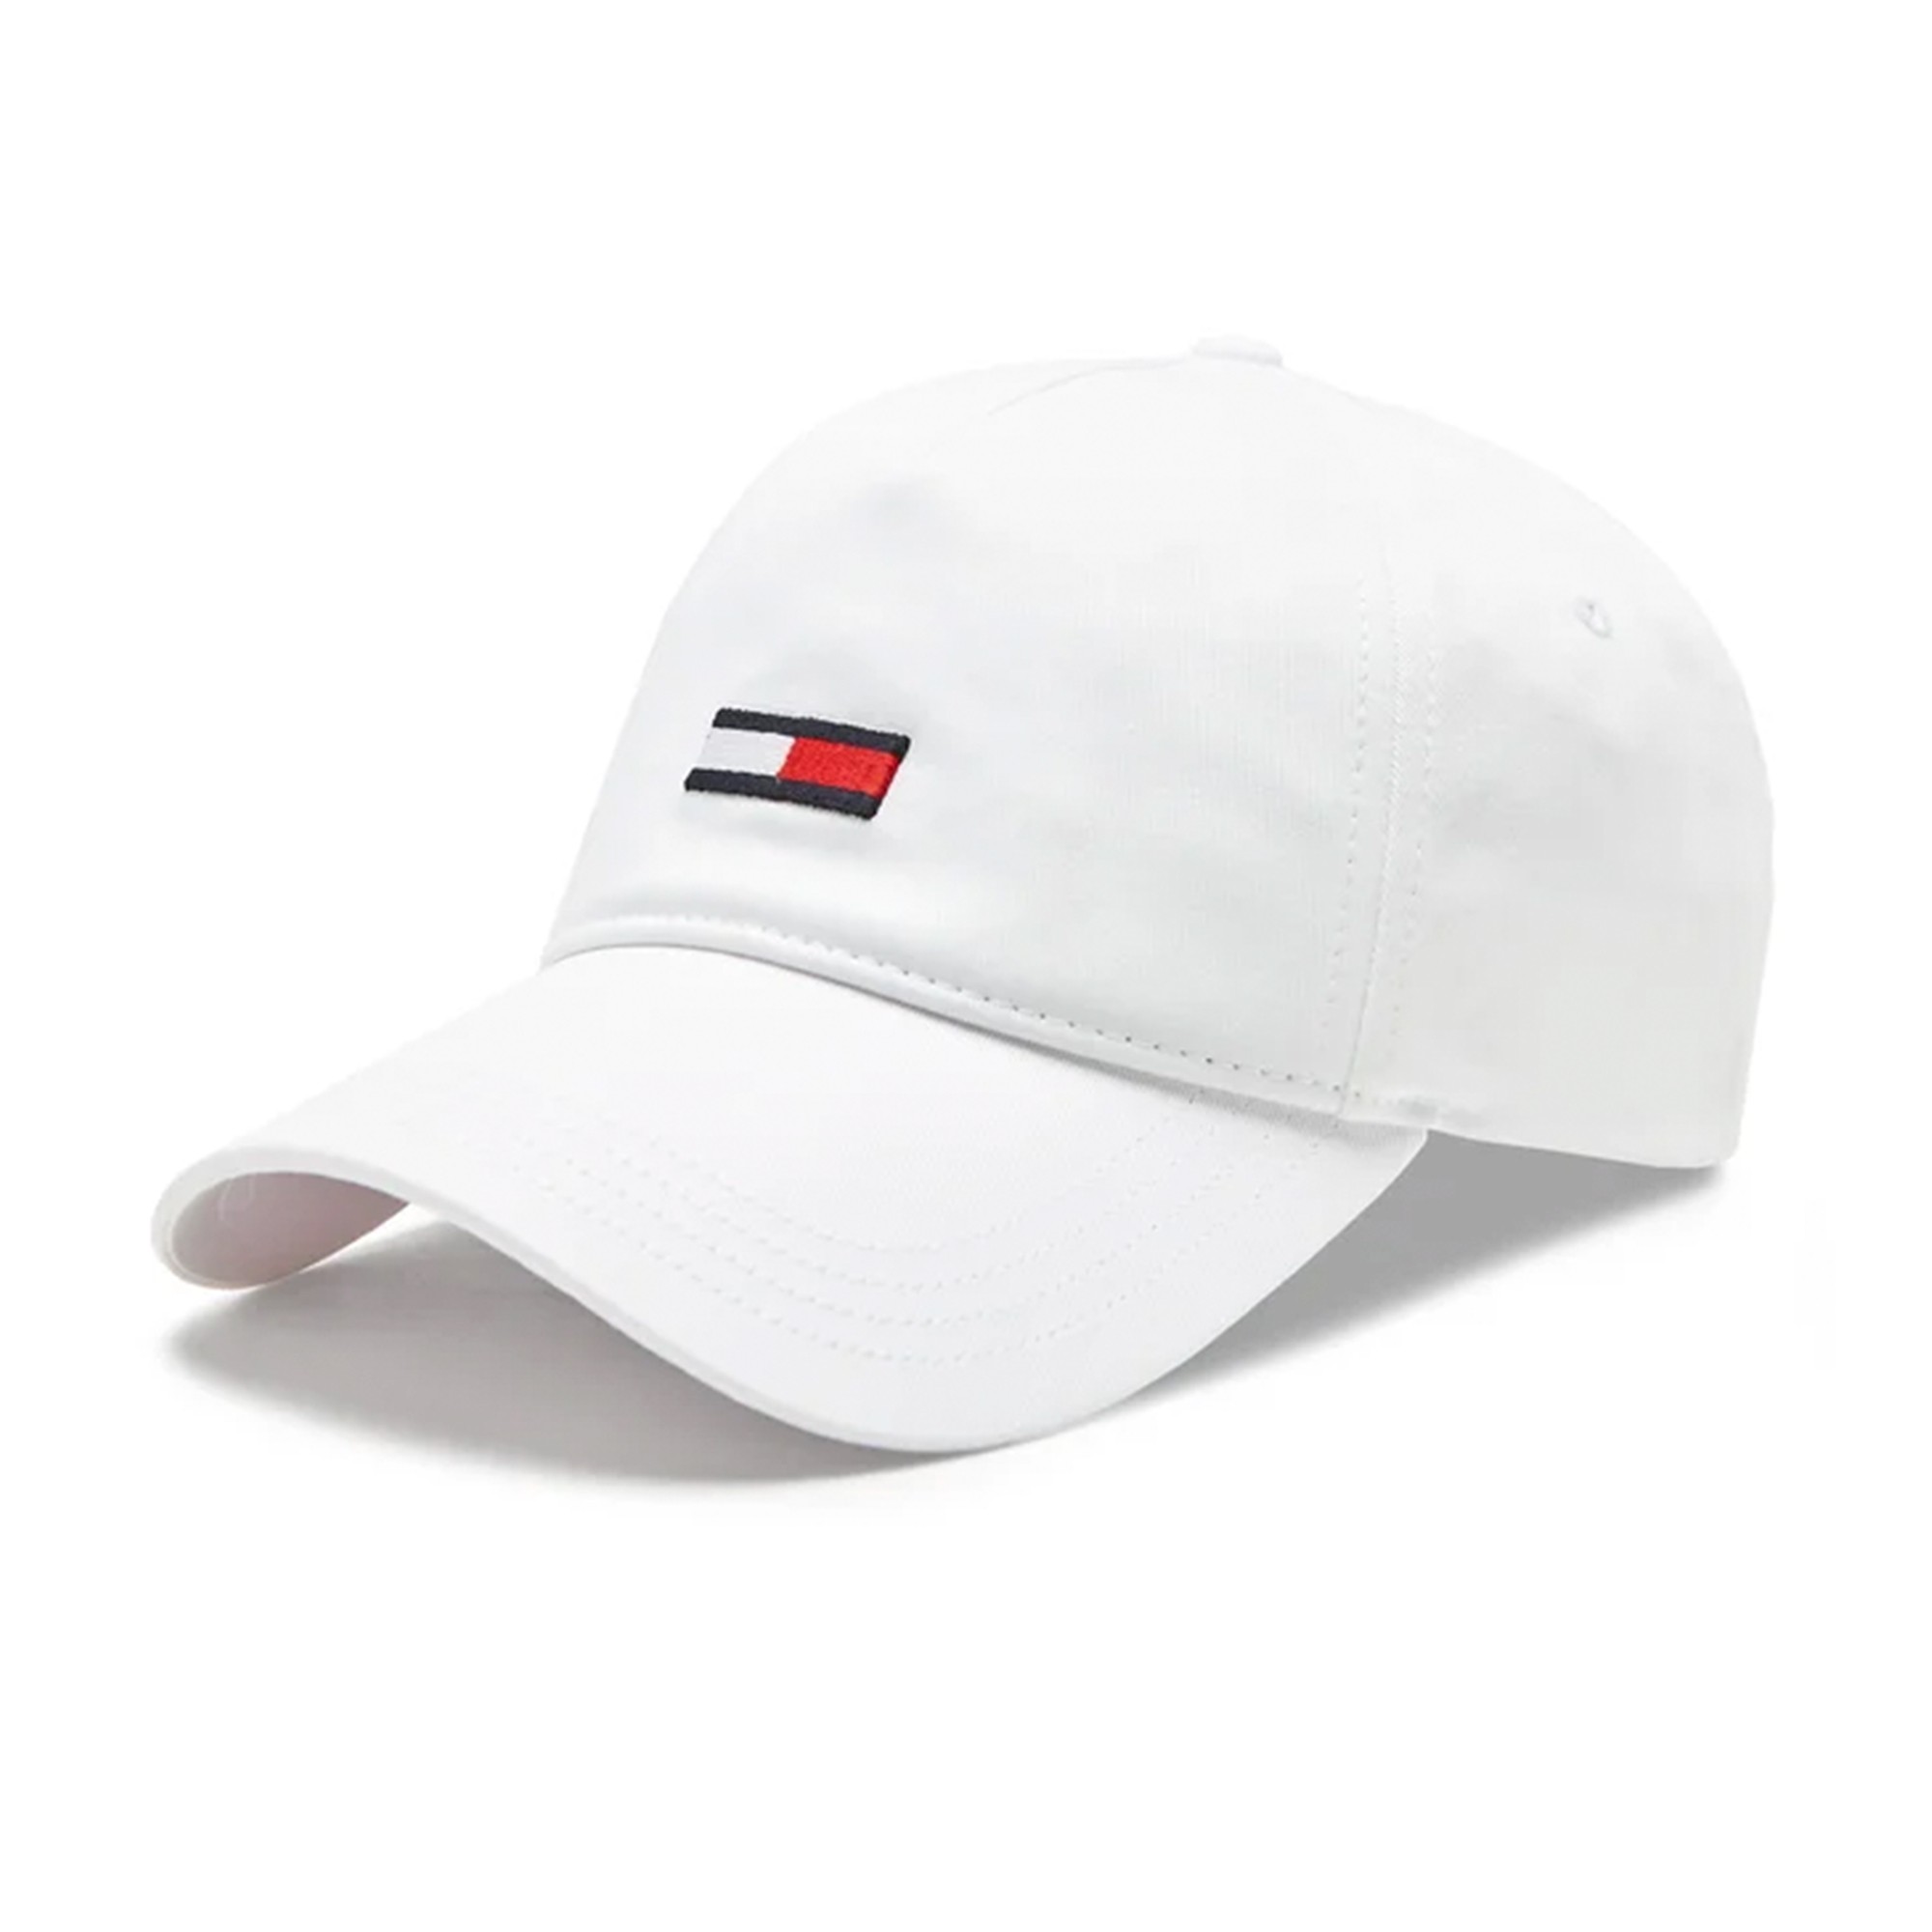 WHITE YBR visors and TOMMY HILFIGER AW0AW14986 Caps